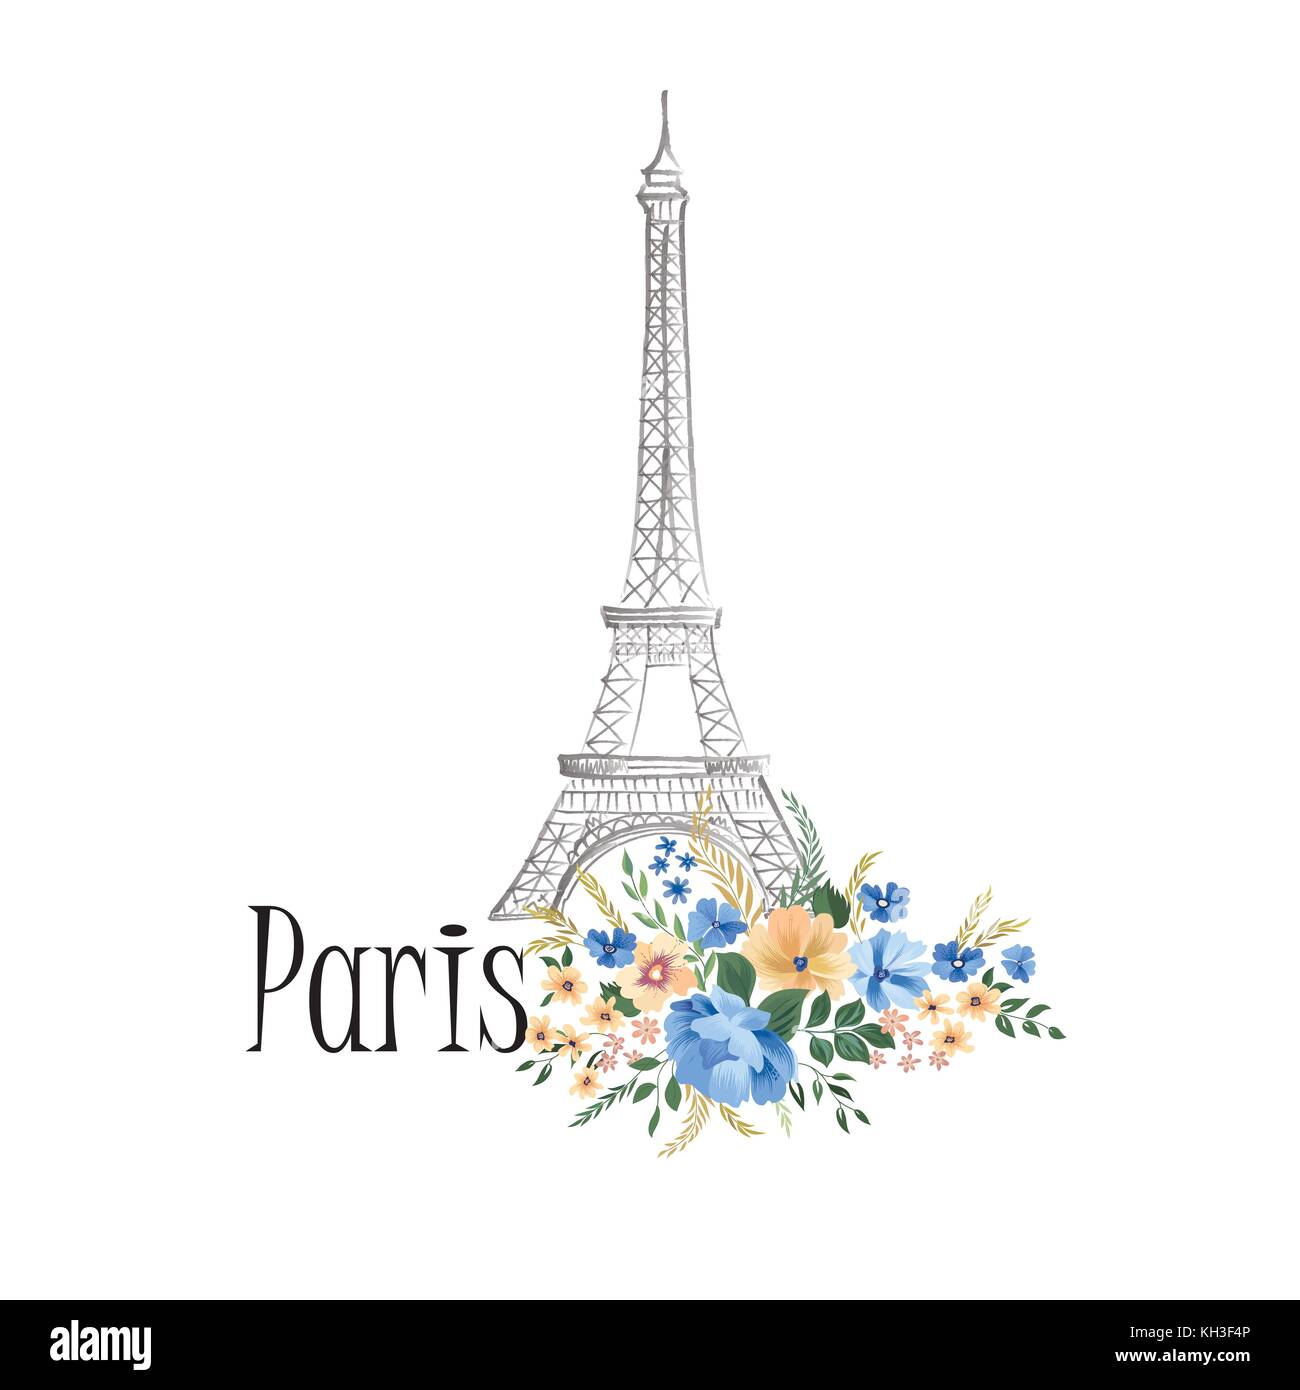 Paris background. Floral Paris sign with flower bouquet and Eiffel tower landmark. Travel France icon Stock Vector